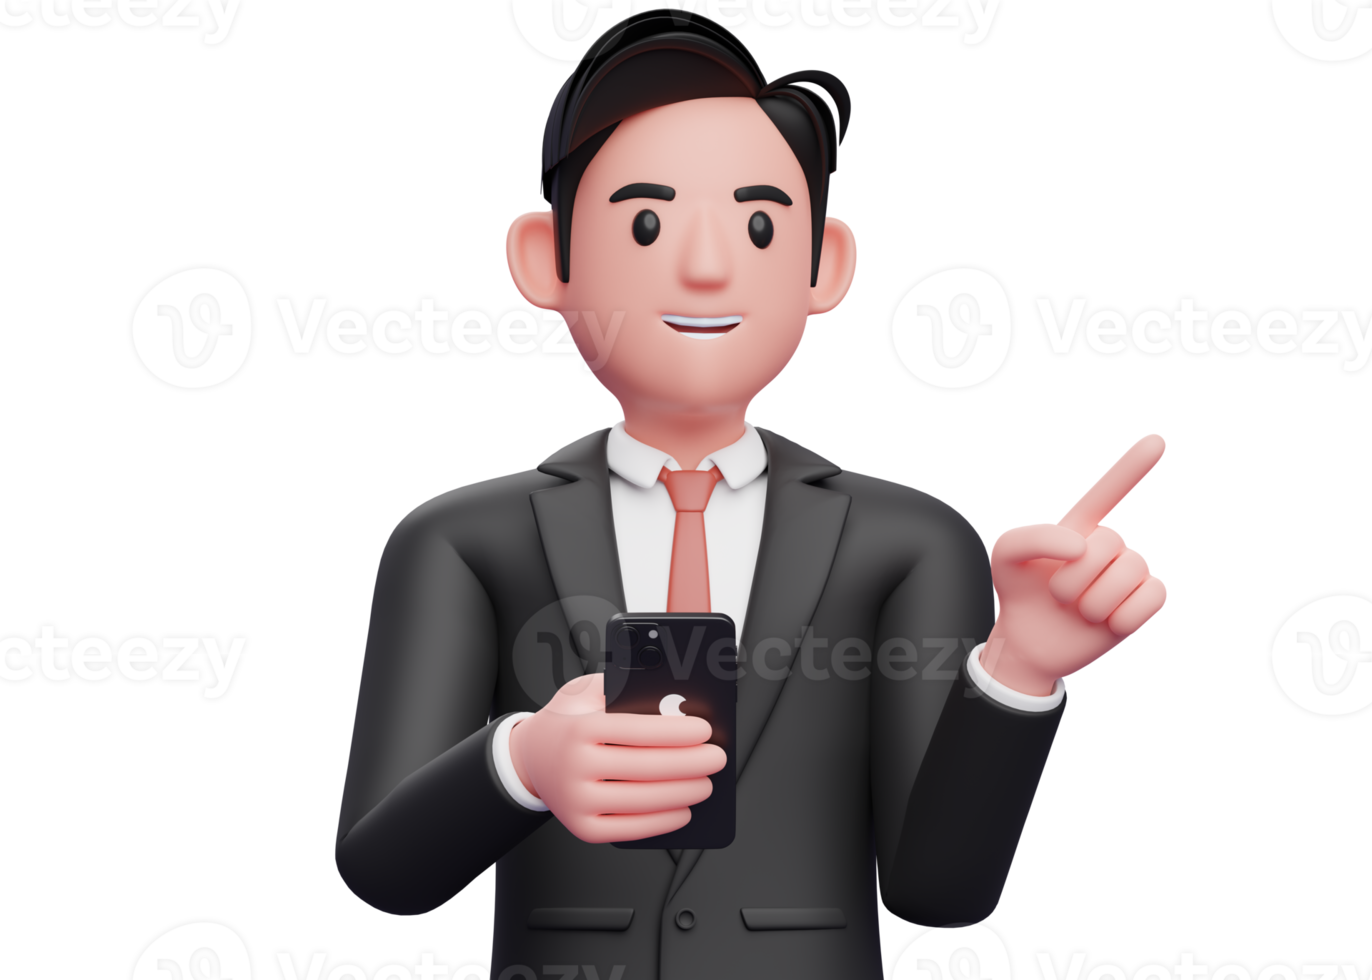 close up of businessman in black formal suit pointing to the side choosing gesture and holding a phone, 3d illustration of businessman using phone png